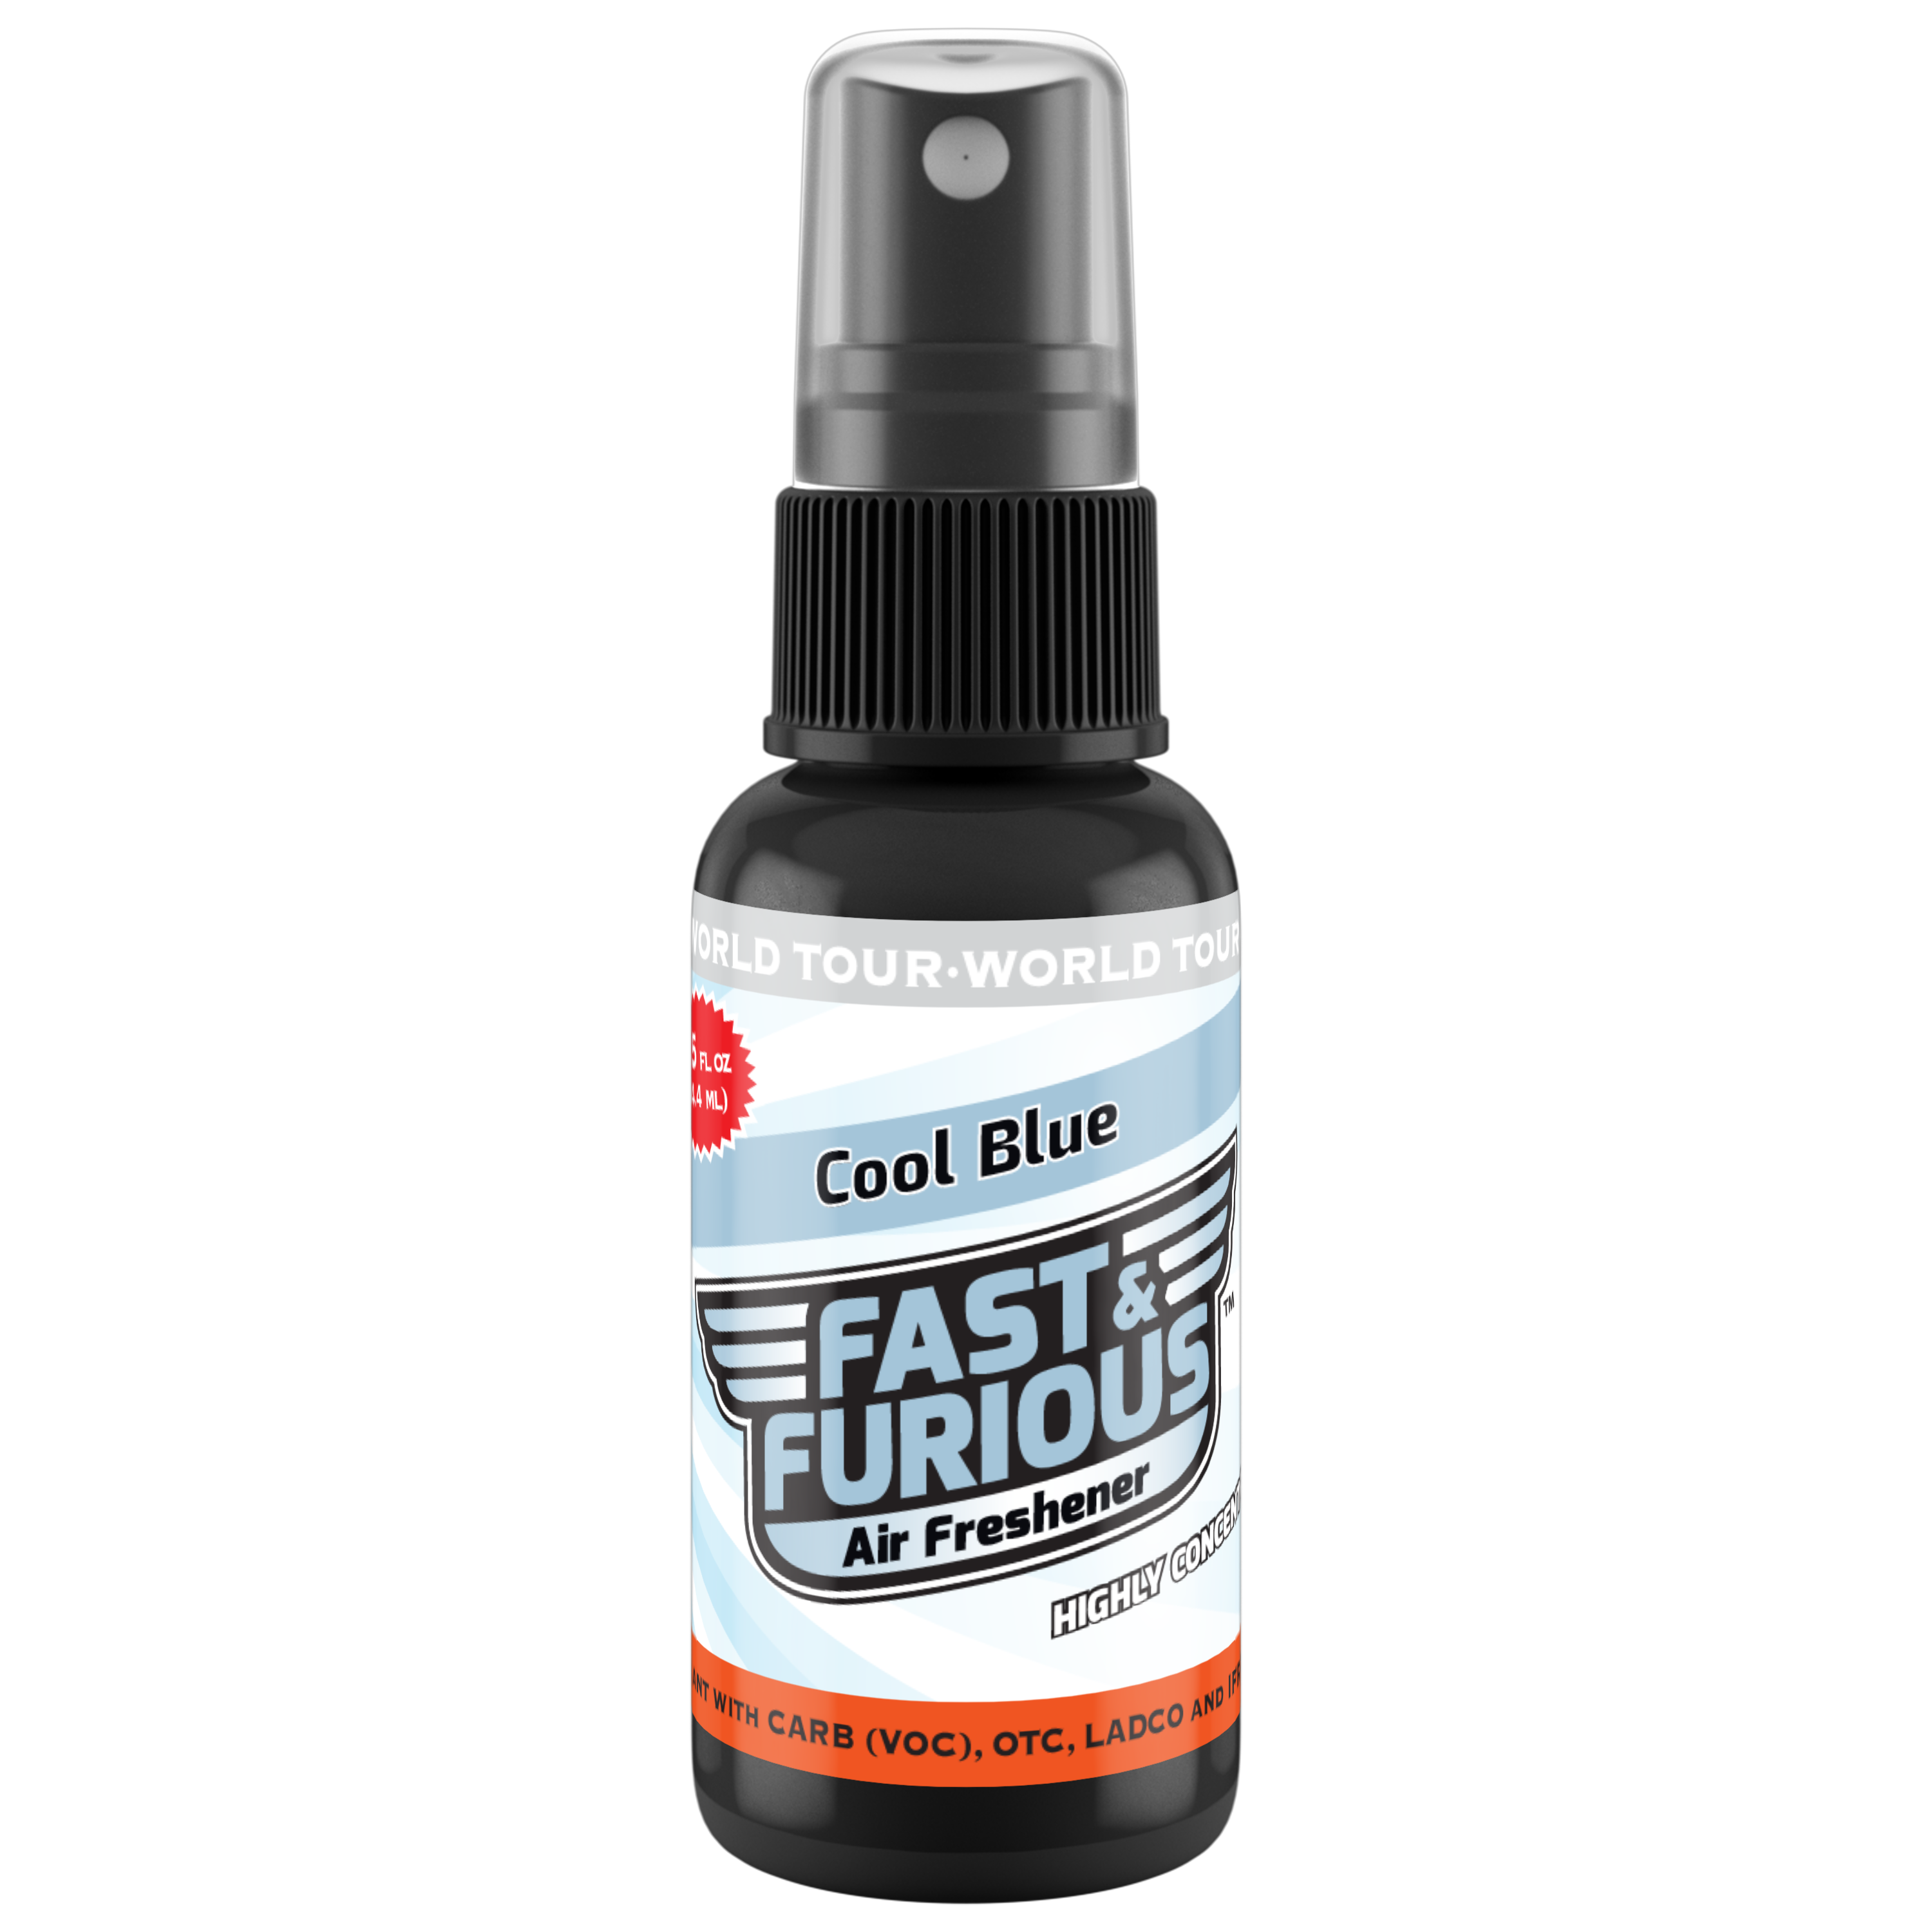 Fast and Furious Air Freshener - Cool Blue Scent